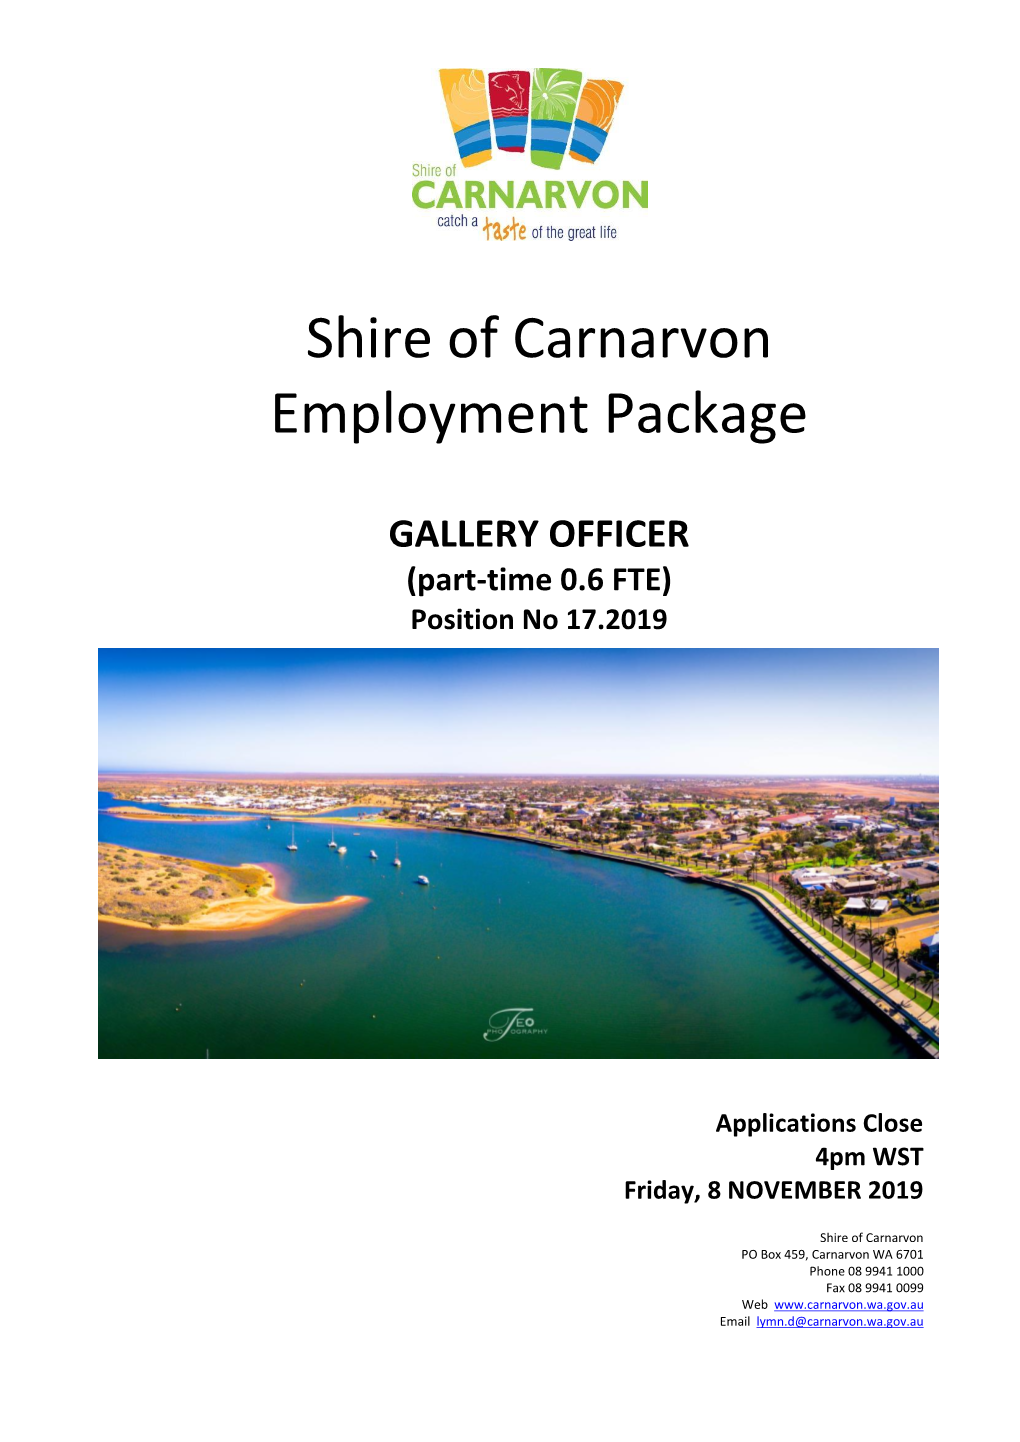 GALLERY OFFICER (Part-Time 0.6 FTE) Position No 17.2019